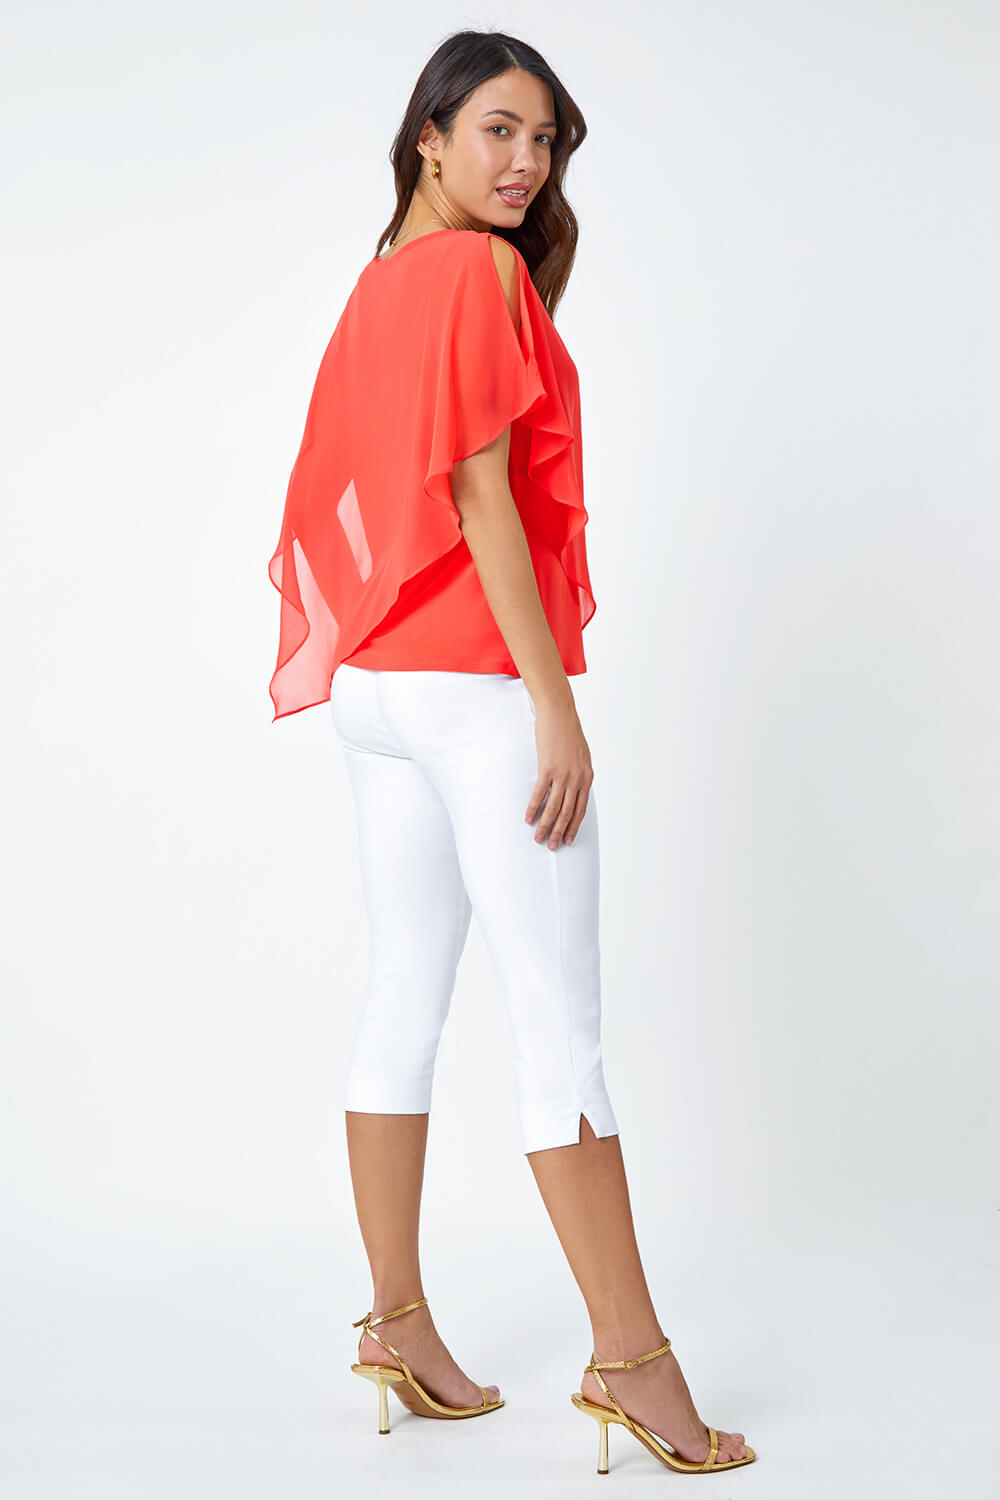 CORAL Asymmetric Cold Shoulder Stretch Top, Image 3 of 5